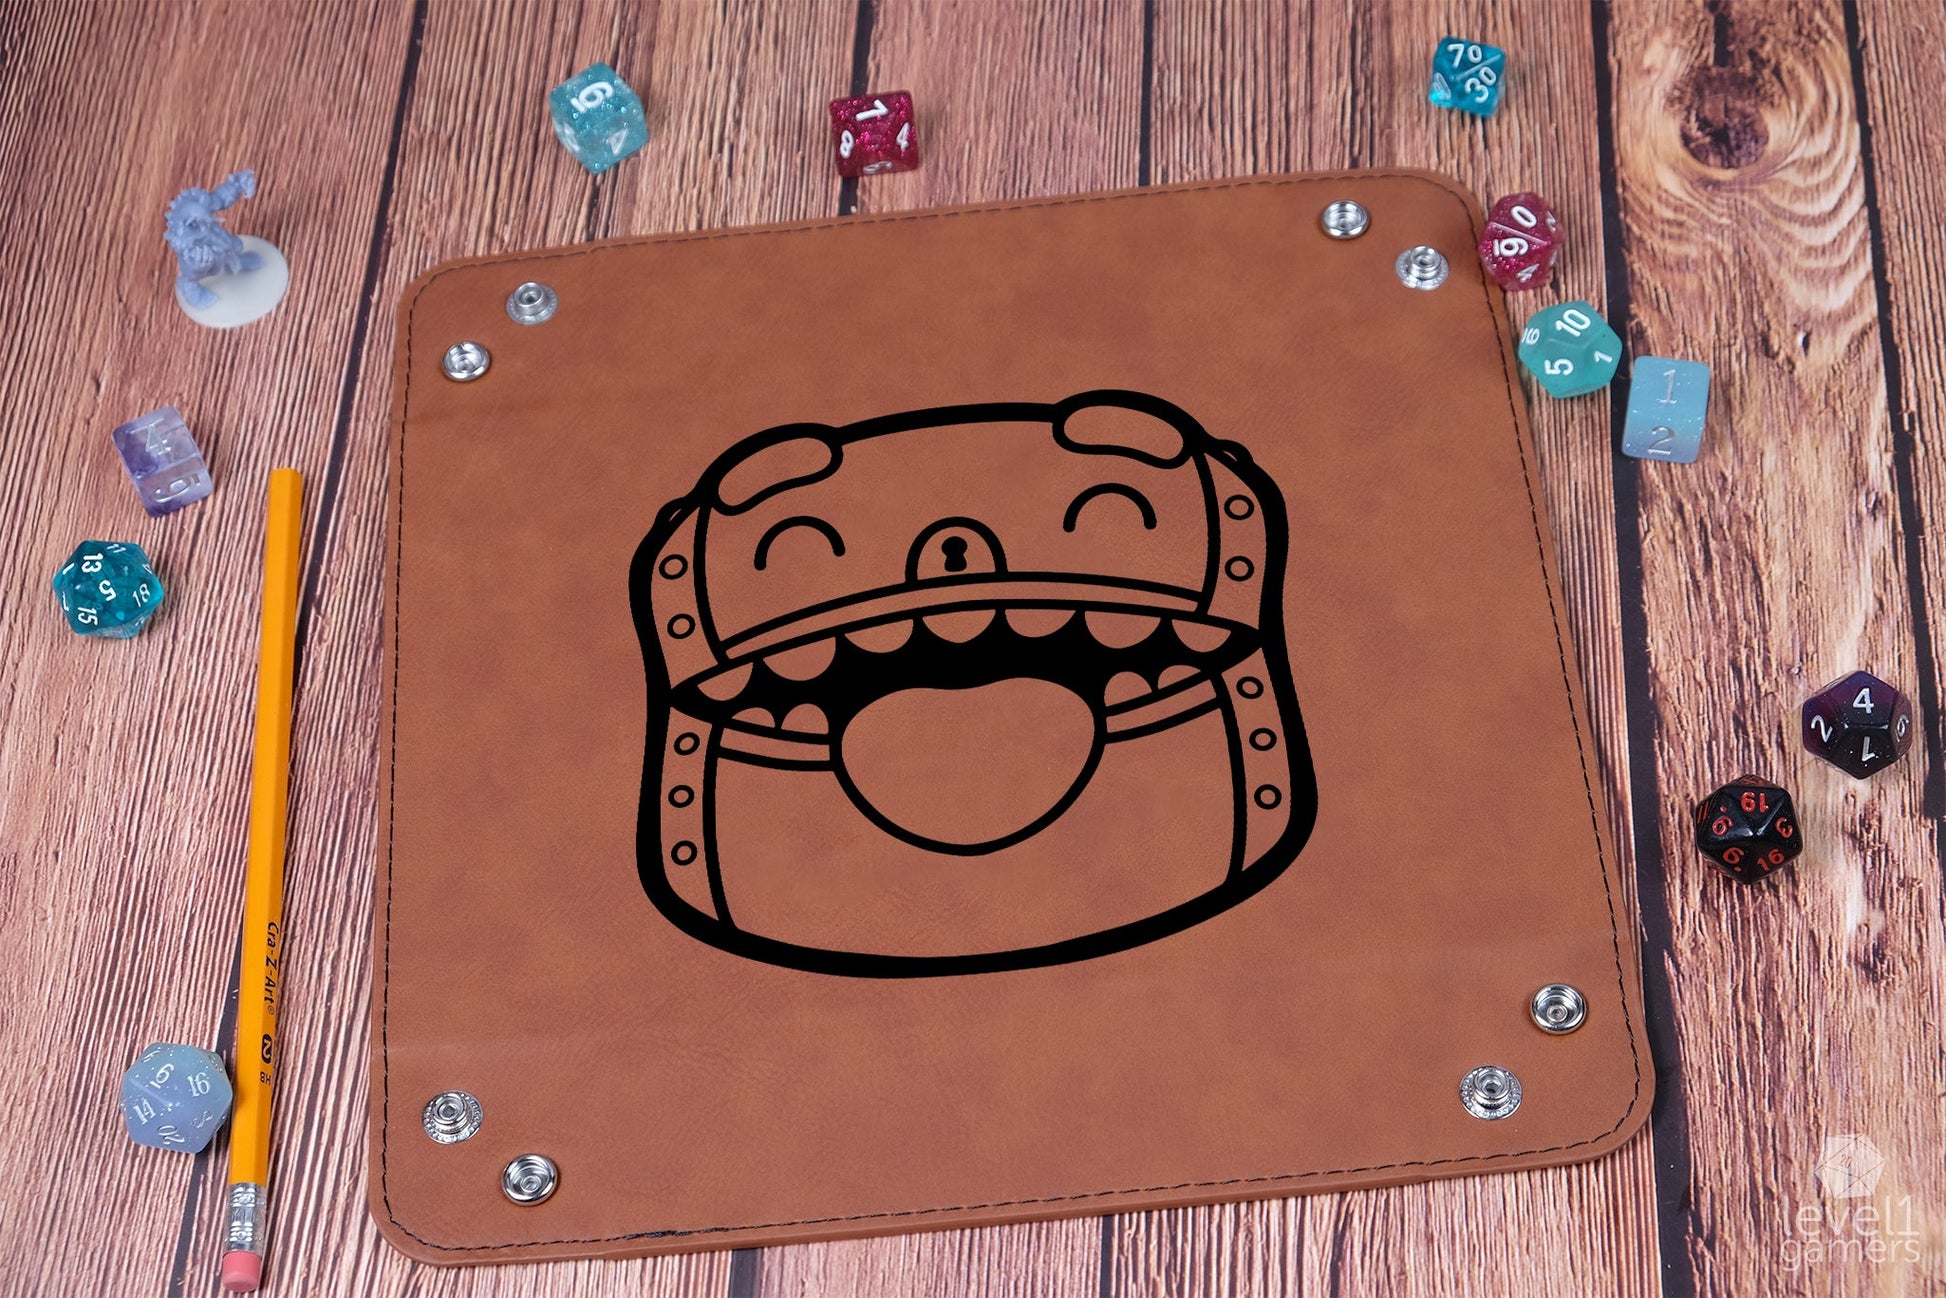 Little Mimic Dice Tray Dice Trays Level 1 Gamers   